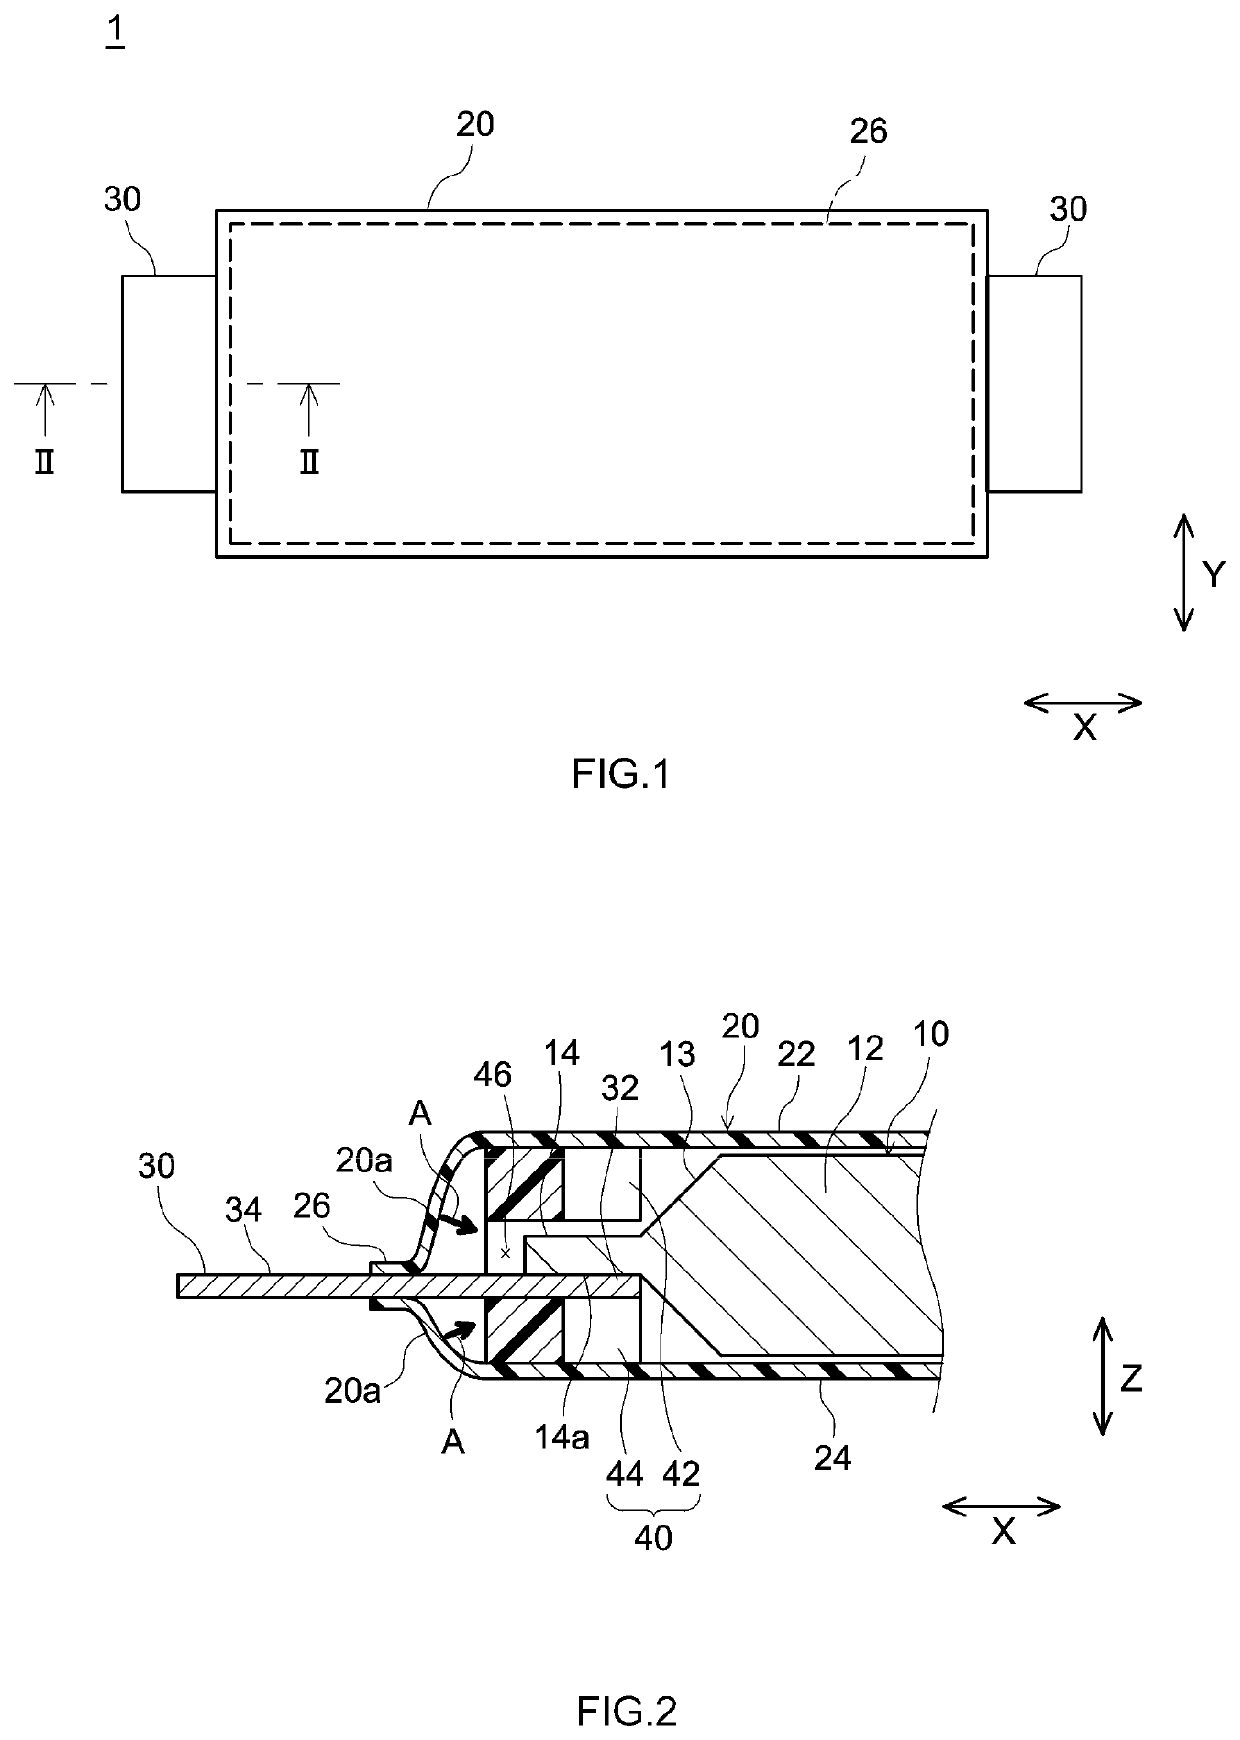 Secondary battery having improved manufacturability and performance